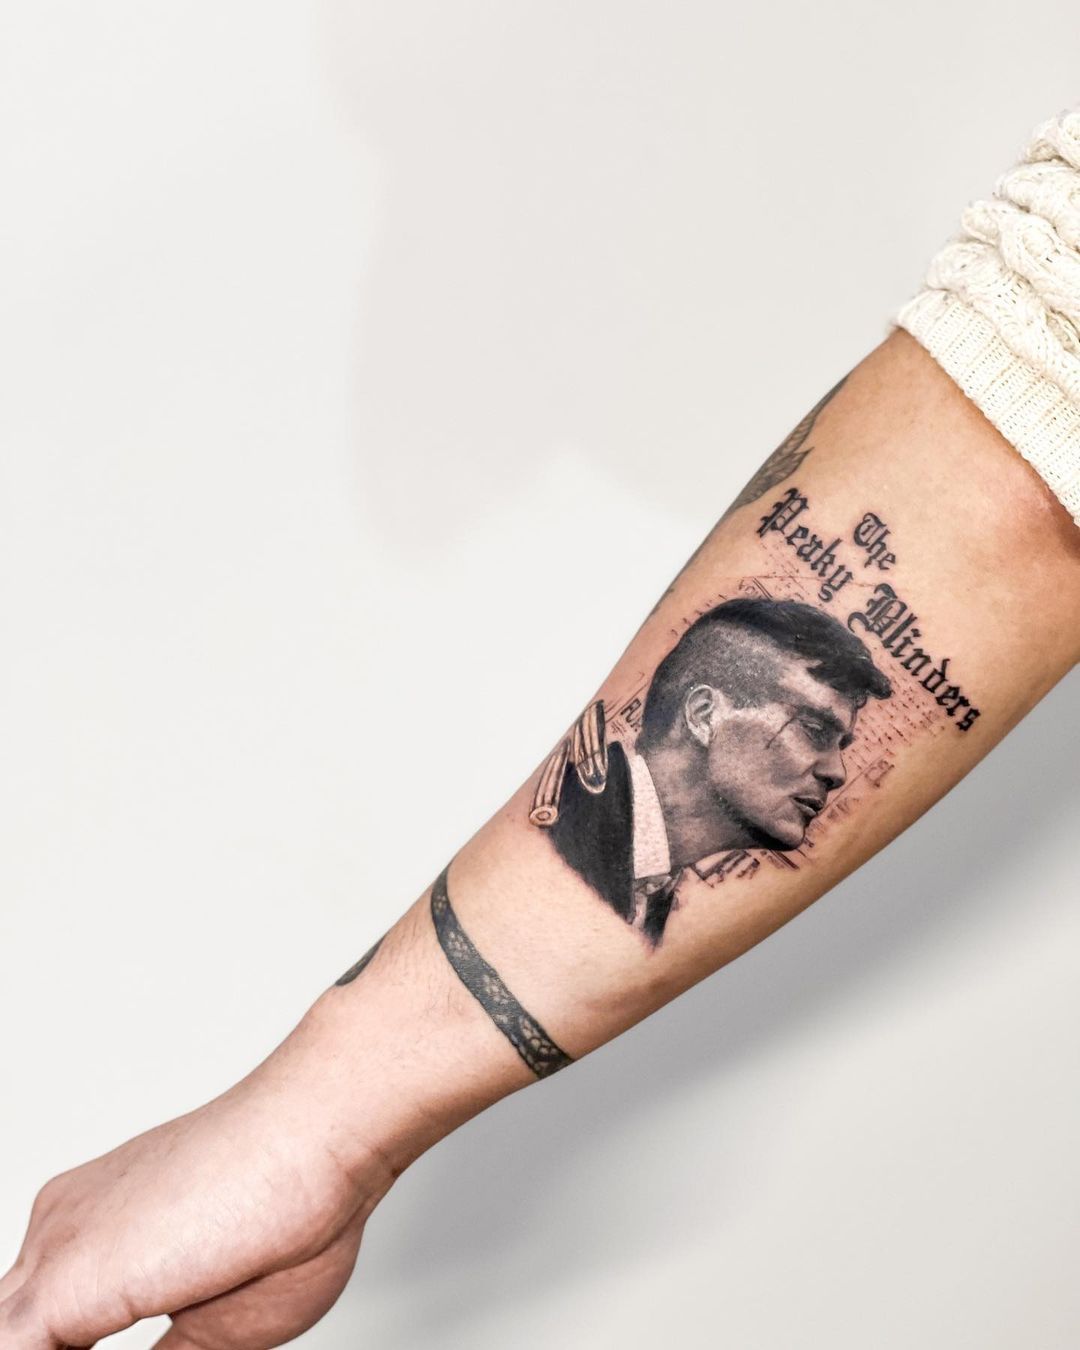 Peaky Blinders - Significados de tatuagens #peakyblinders #tattoo  #tommyshelby #shelby 